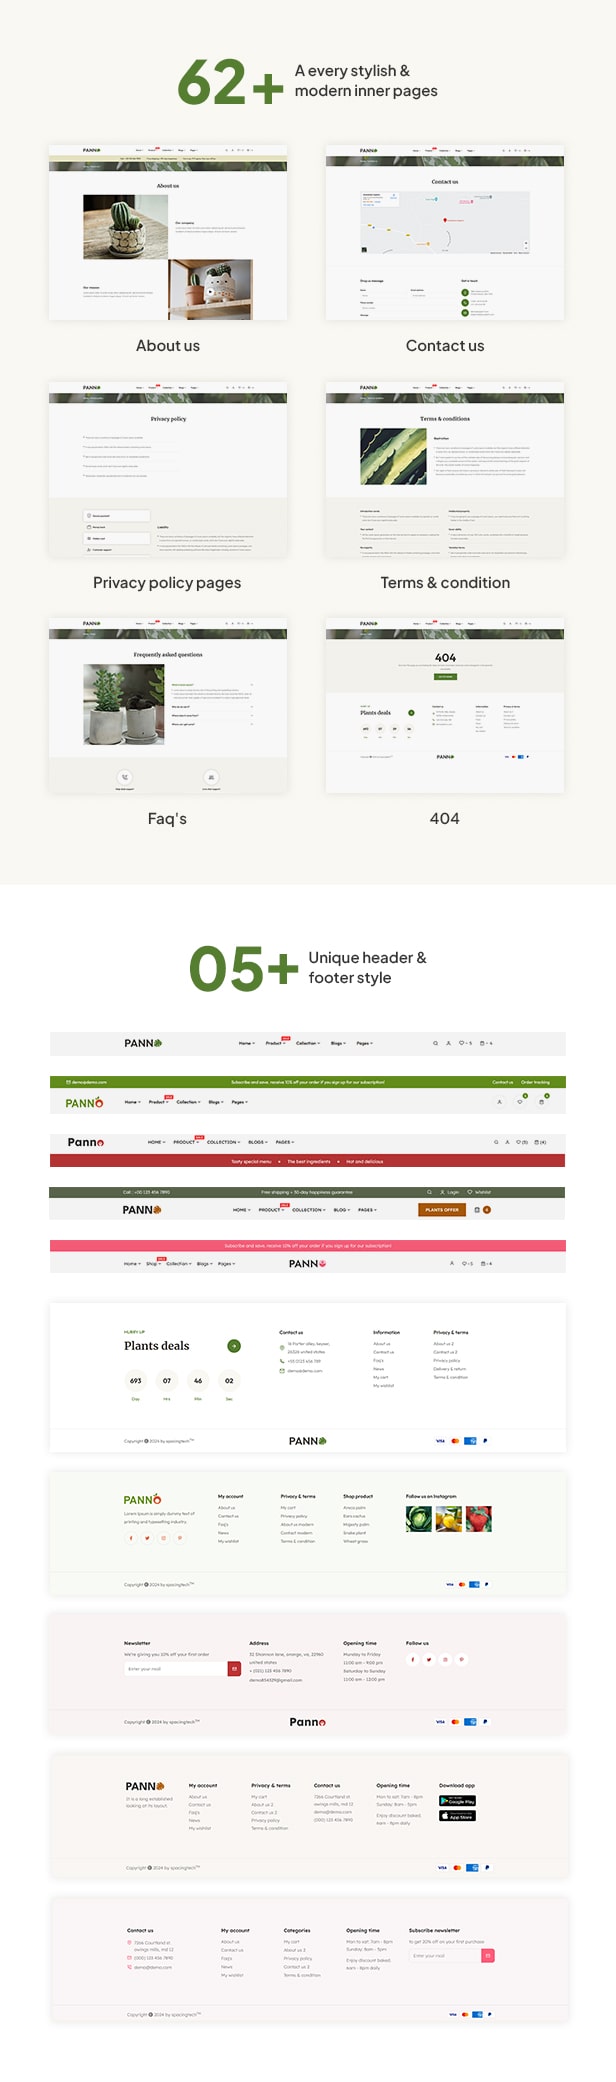 Panno - The Plants & Organic Food eCommerce HTML5 template - 2